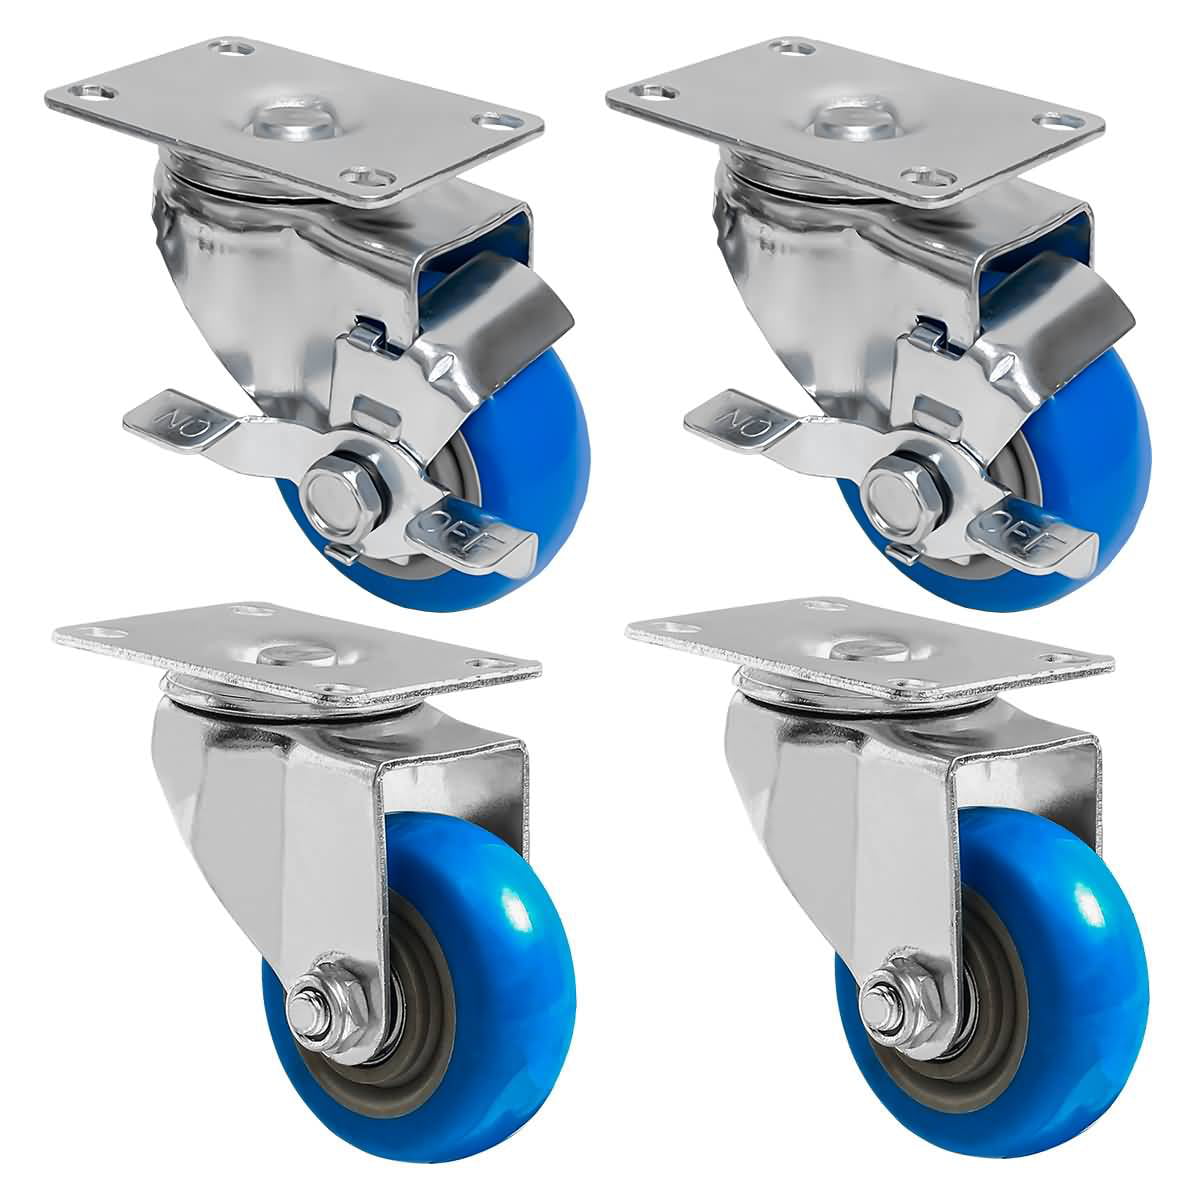 Color : Universal, Size : 75mm/3in Casters Castor Wheels Moving Wheels Heavy Duty Wheels for Furniture,Plate Trolley Wheels in Polyurethane,Double Bearing,with Screws,4 Pcs 